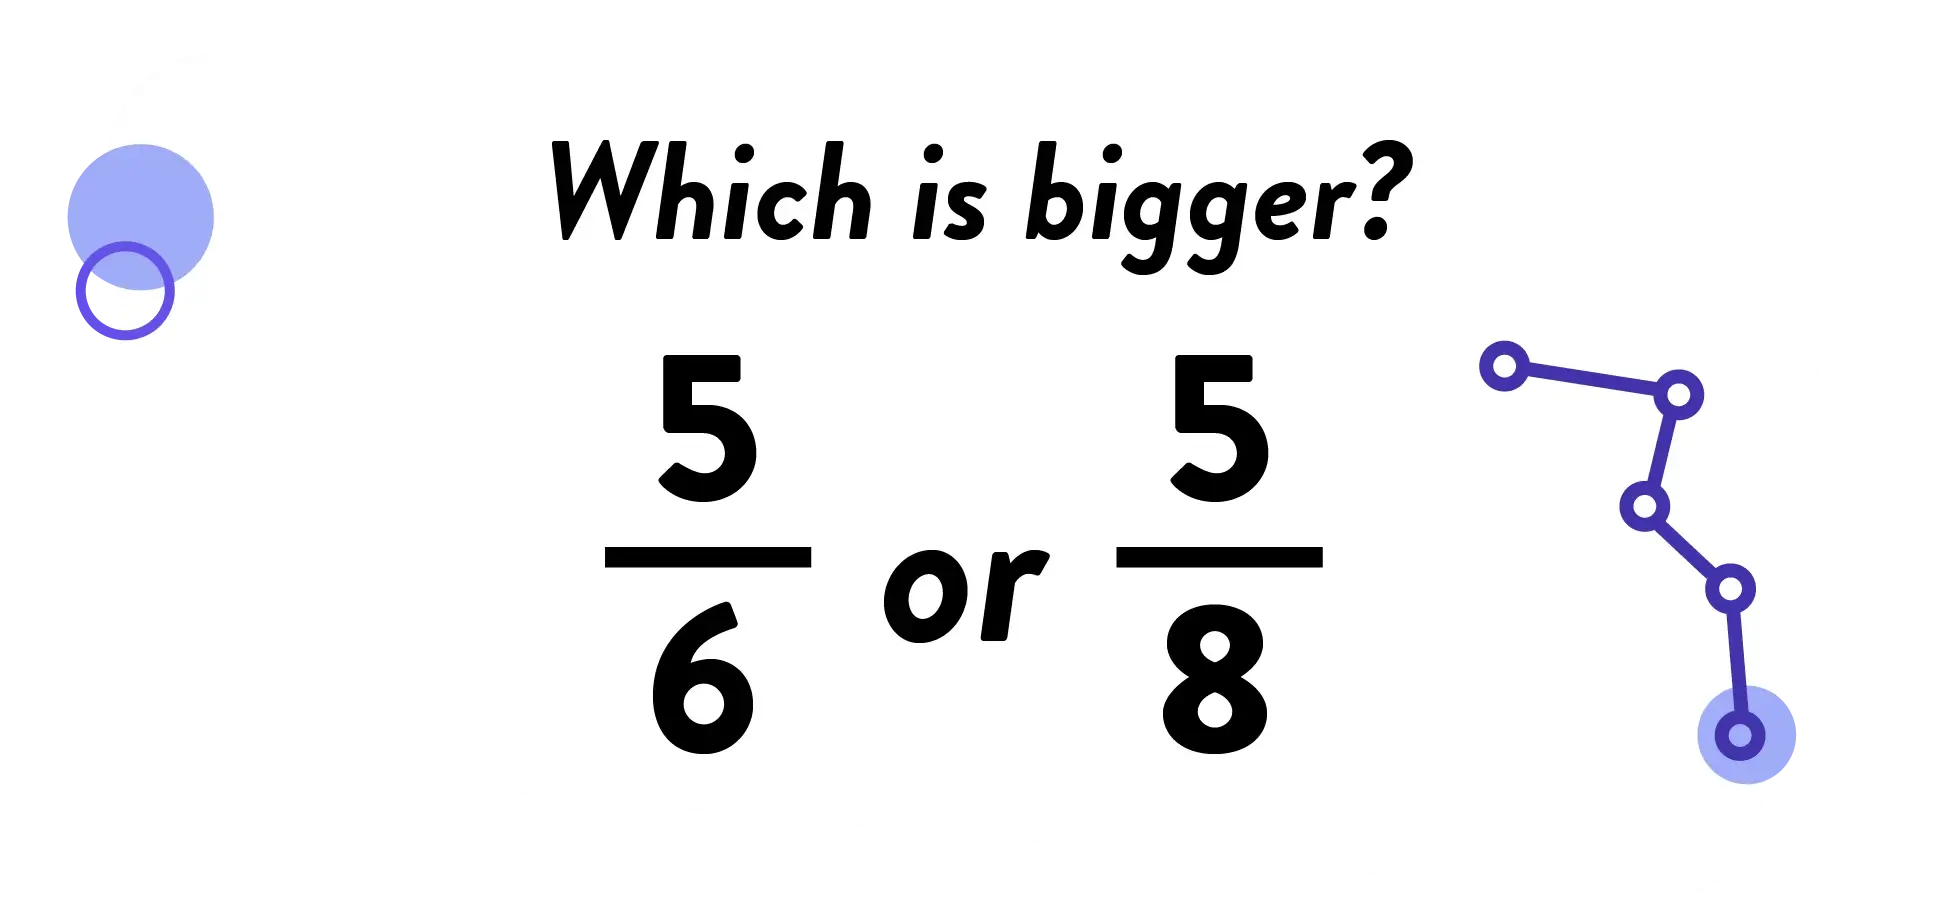 Which is bigger? 5/6 or 5/8